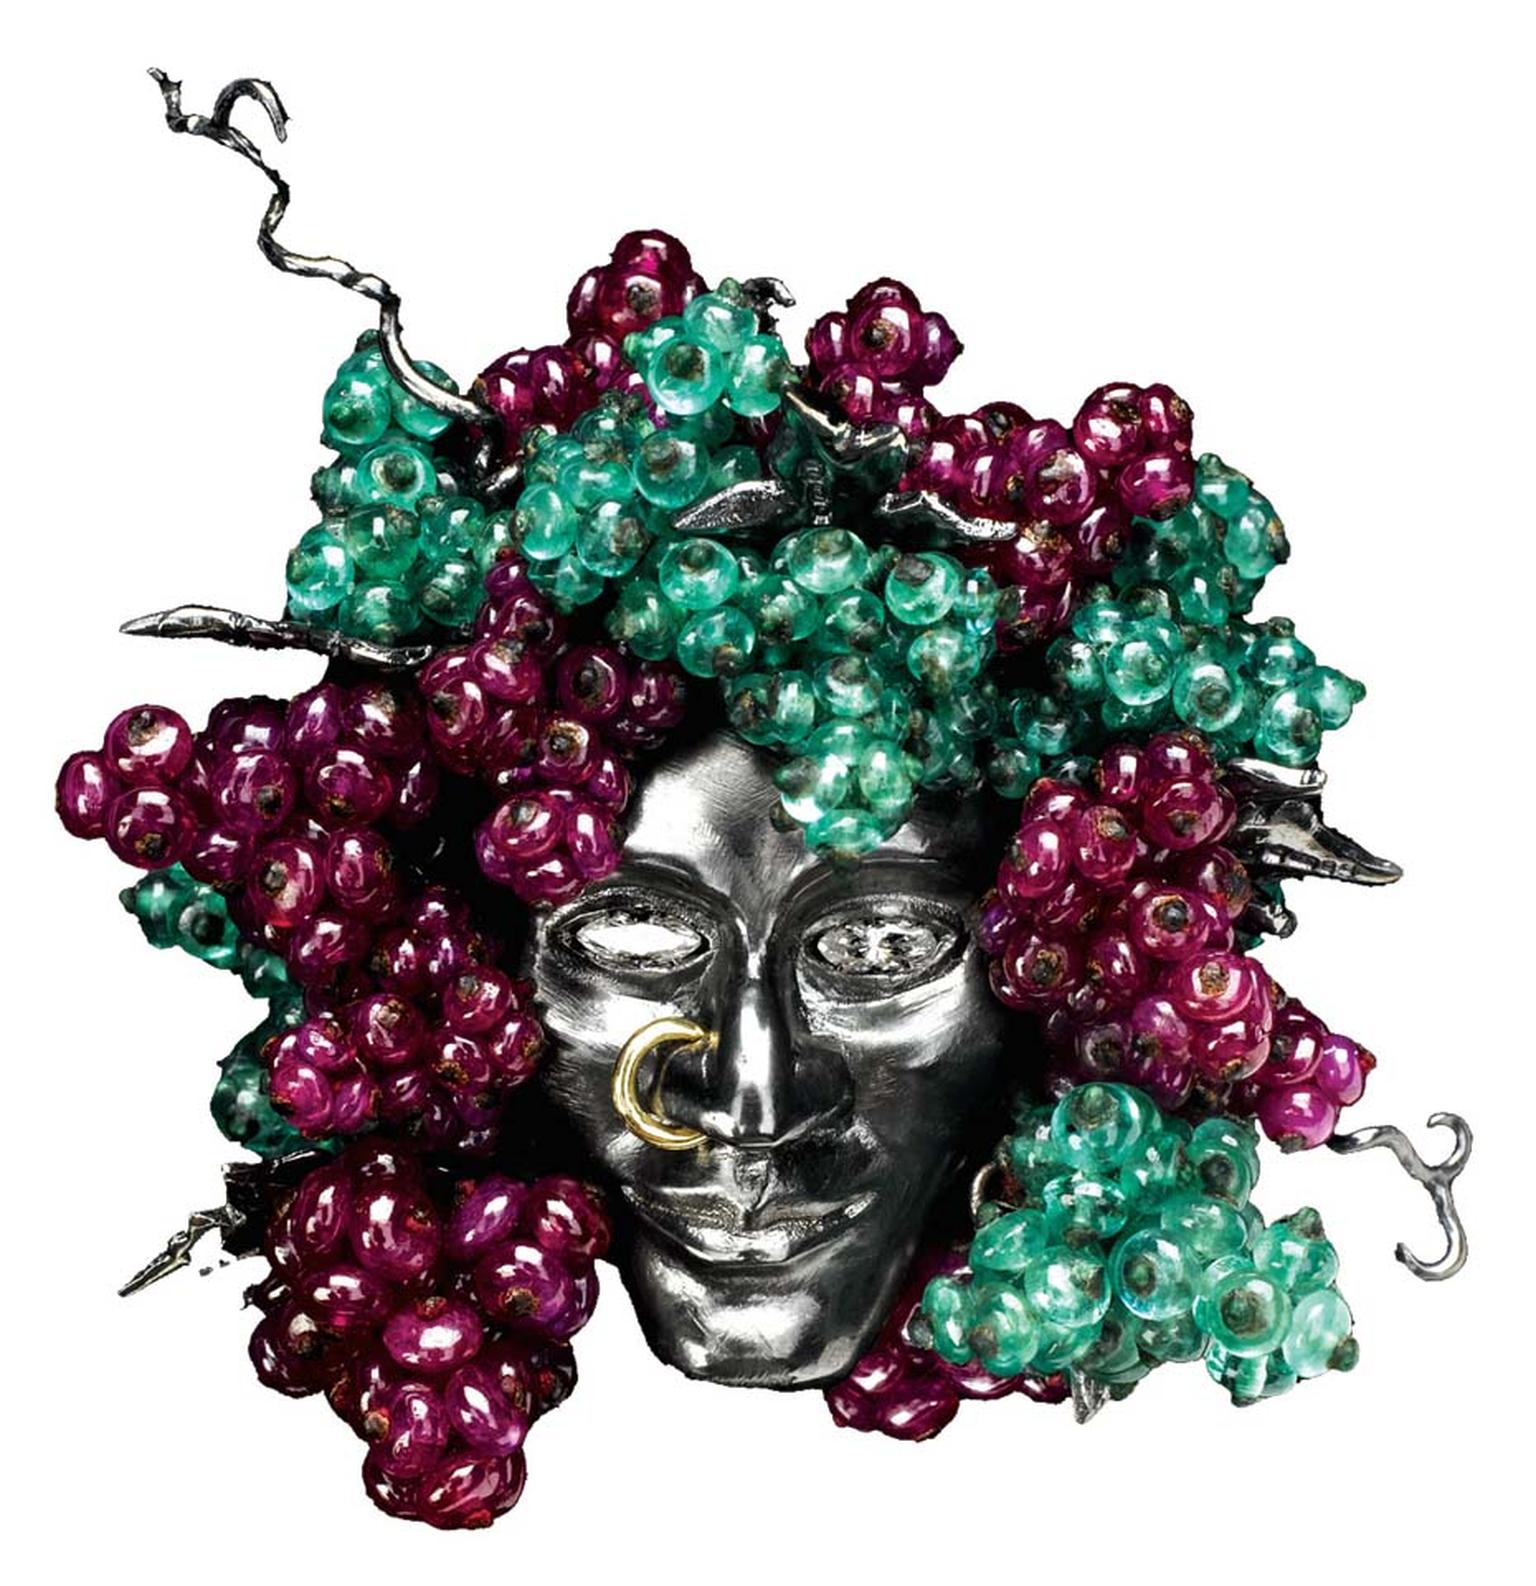 Solange Azagury-Partidge's Bacchus is a stunning mix of diamonds and emeralds set in 18ct blackened white gold, and is on sale with Paddle 8 with an estimate of £5,000 to £7,000.